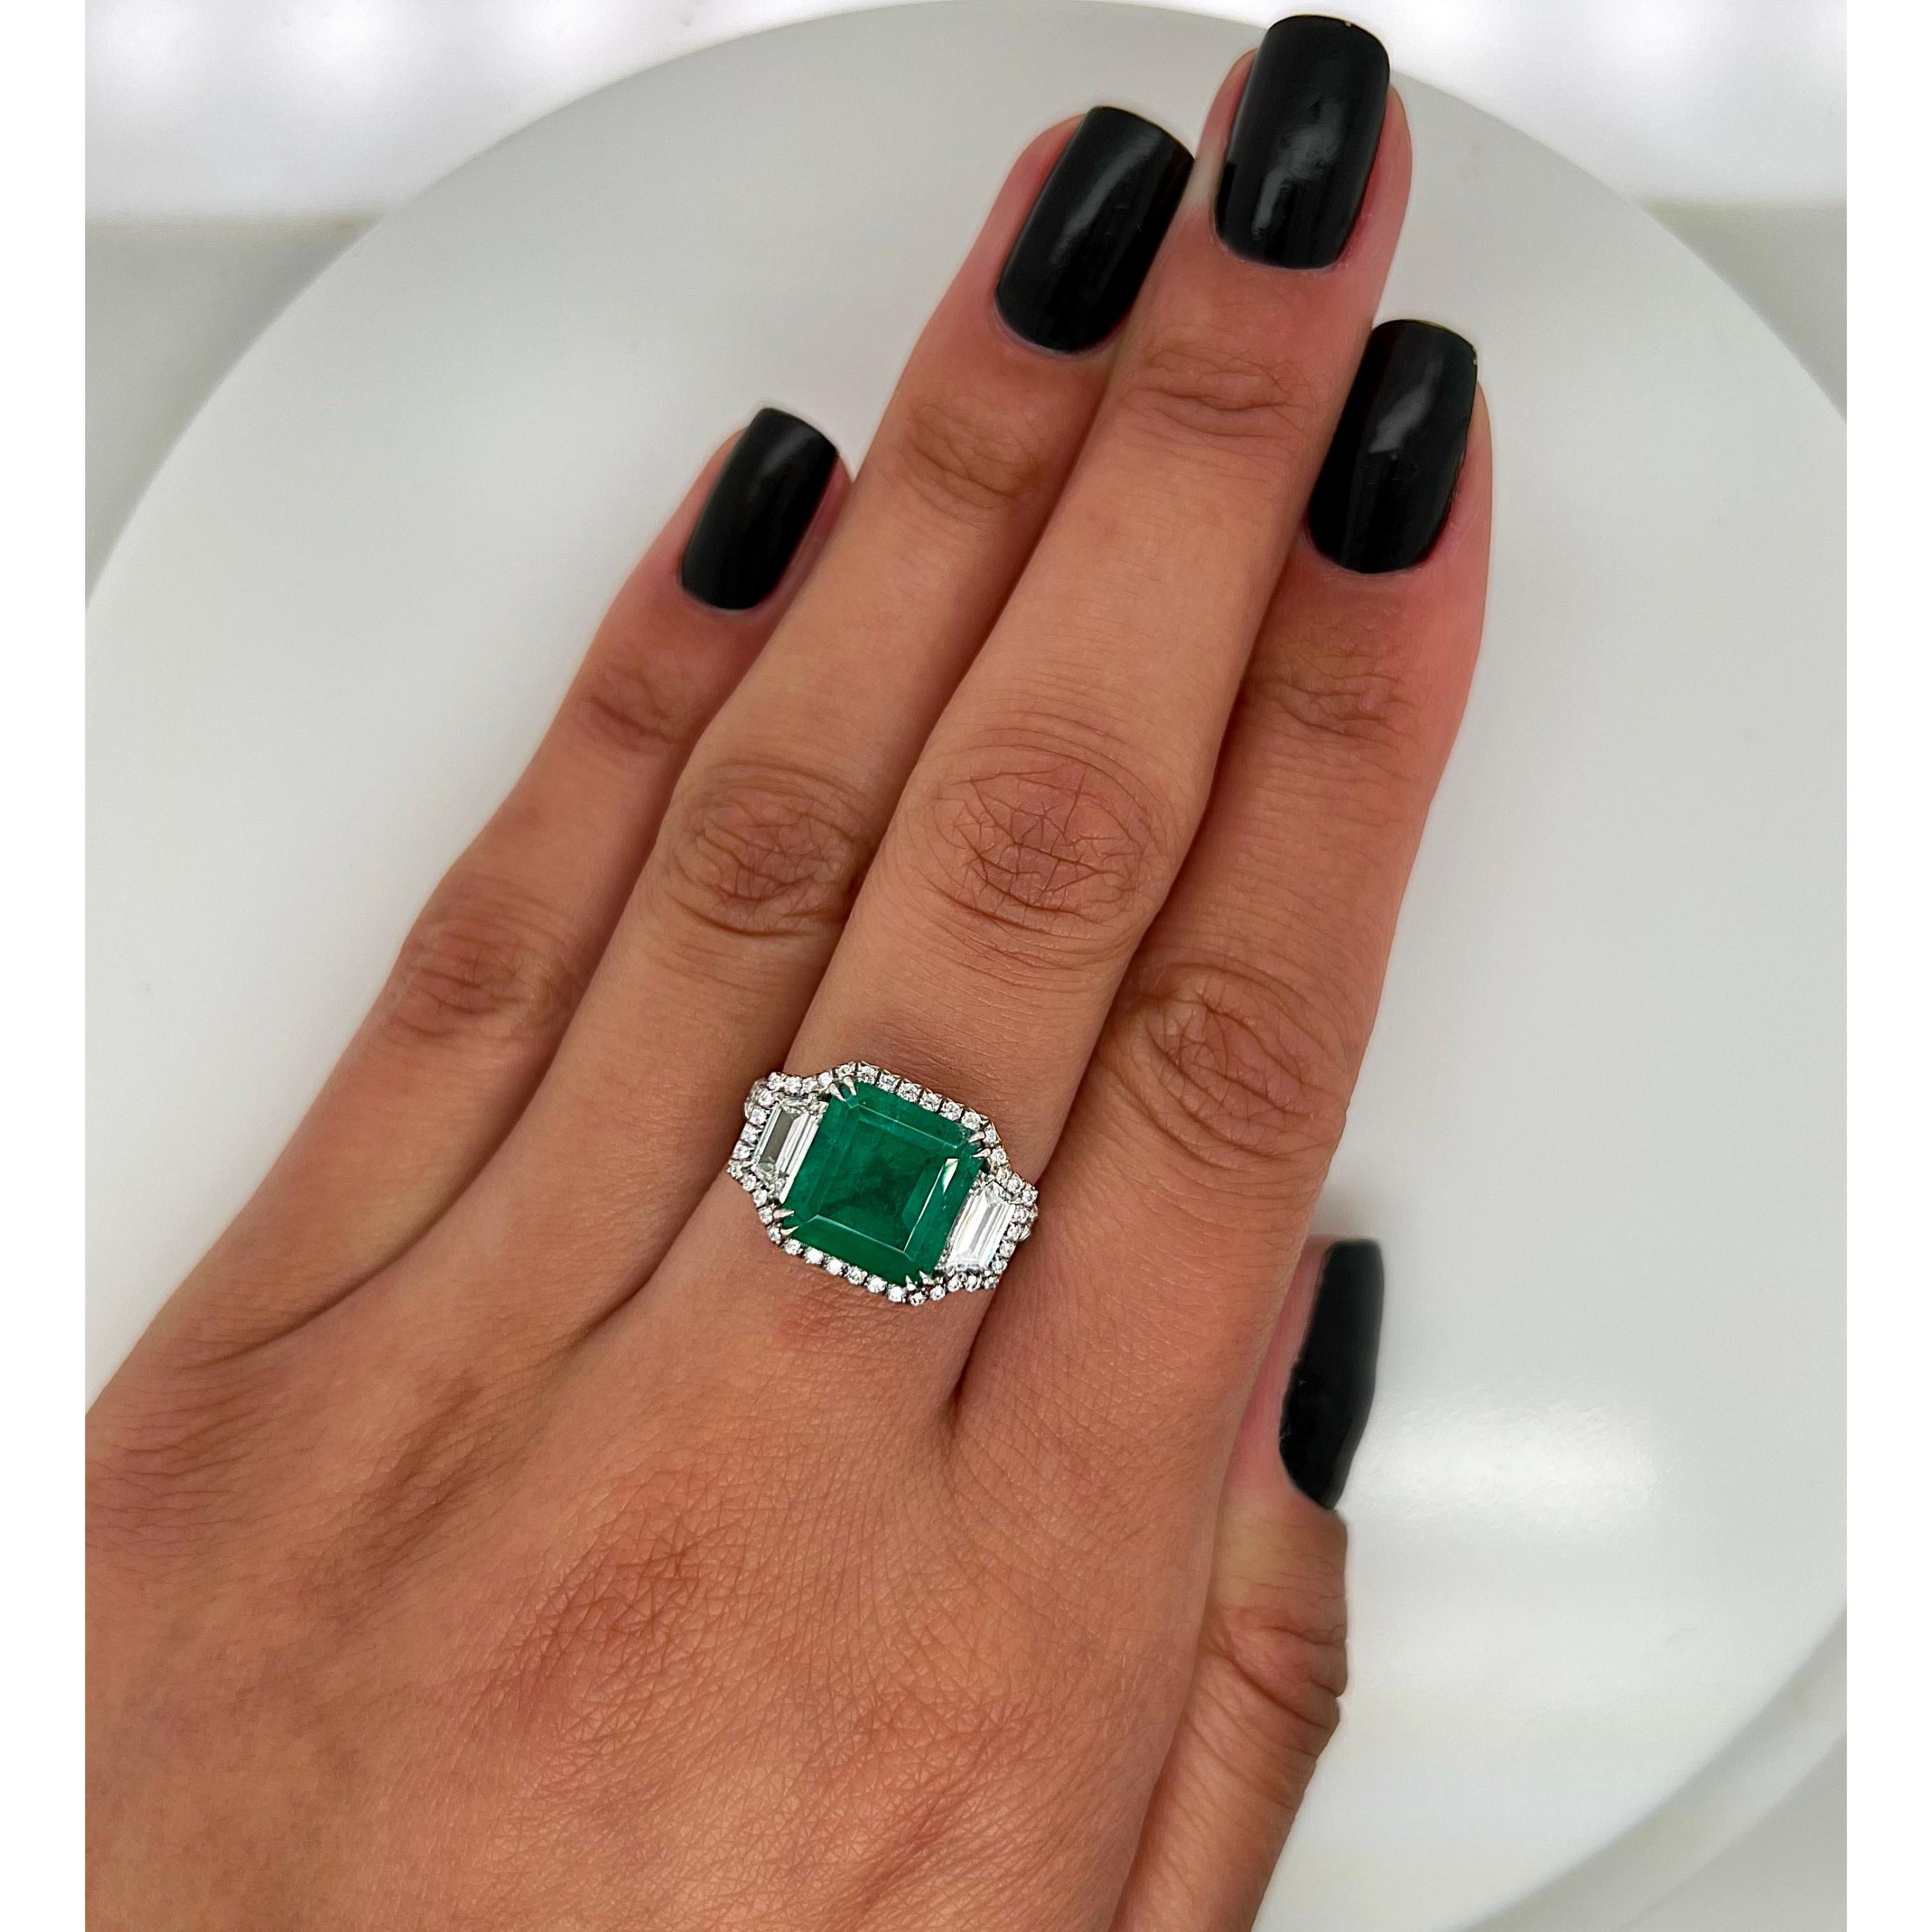 Certified 3.91 Carat Natural Emerald Diamond Cocktail Ring Unique Diamond Ring

A stunning ring featuring IGI/GIA Certified 3.91 Carat Natural Emerald and 0.55 Carat of Diamond Accents set in 18K Solid Gold.

Emeralds are highly valued for their